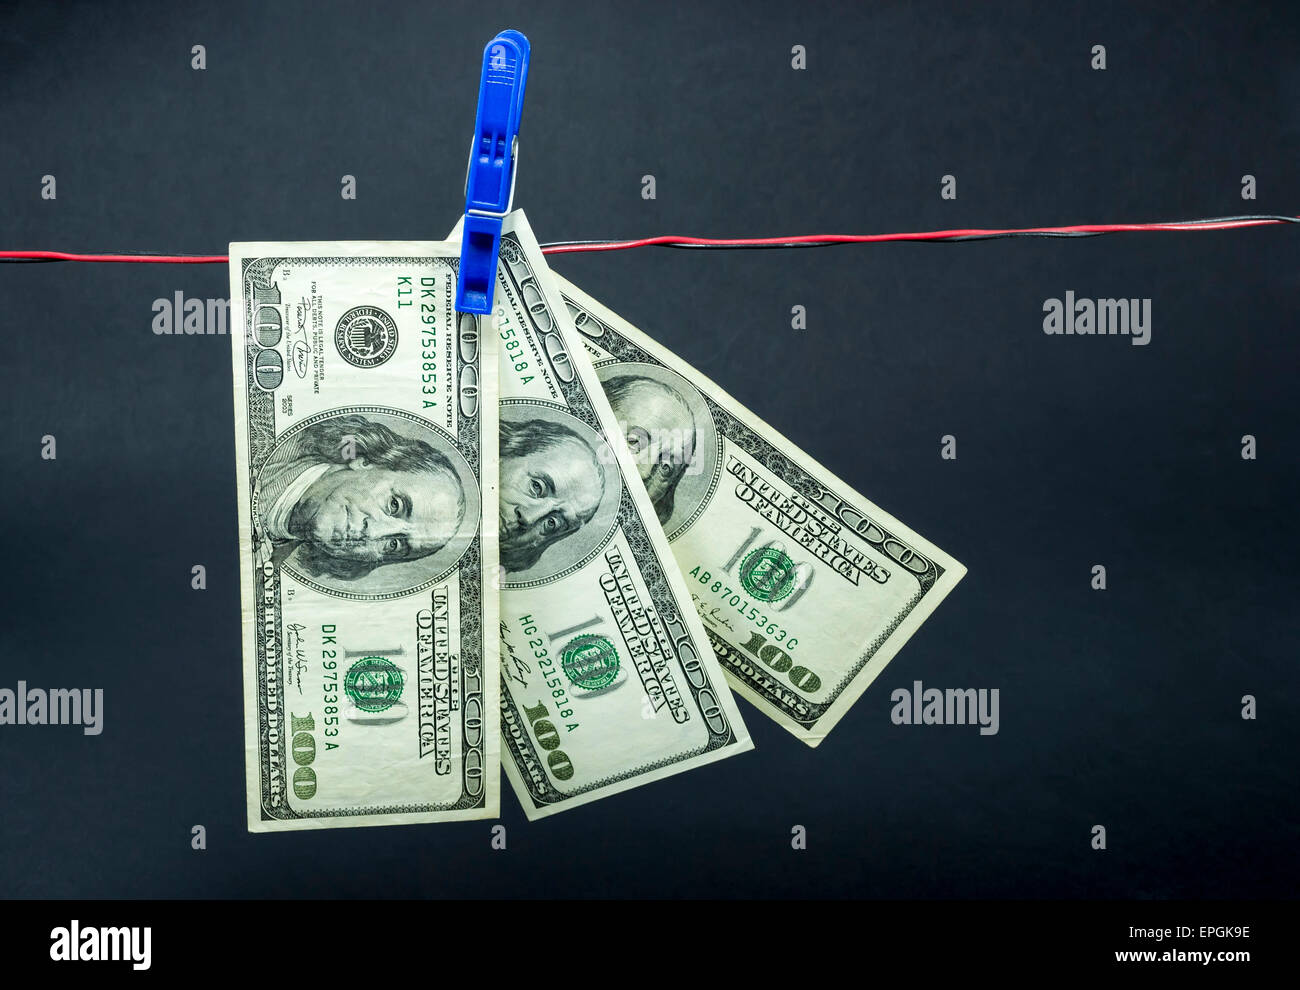 Three hundred dollar bills held with a clothes pin on black background, concept for money laundry or financial fraud Stock Photo